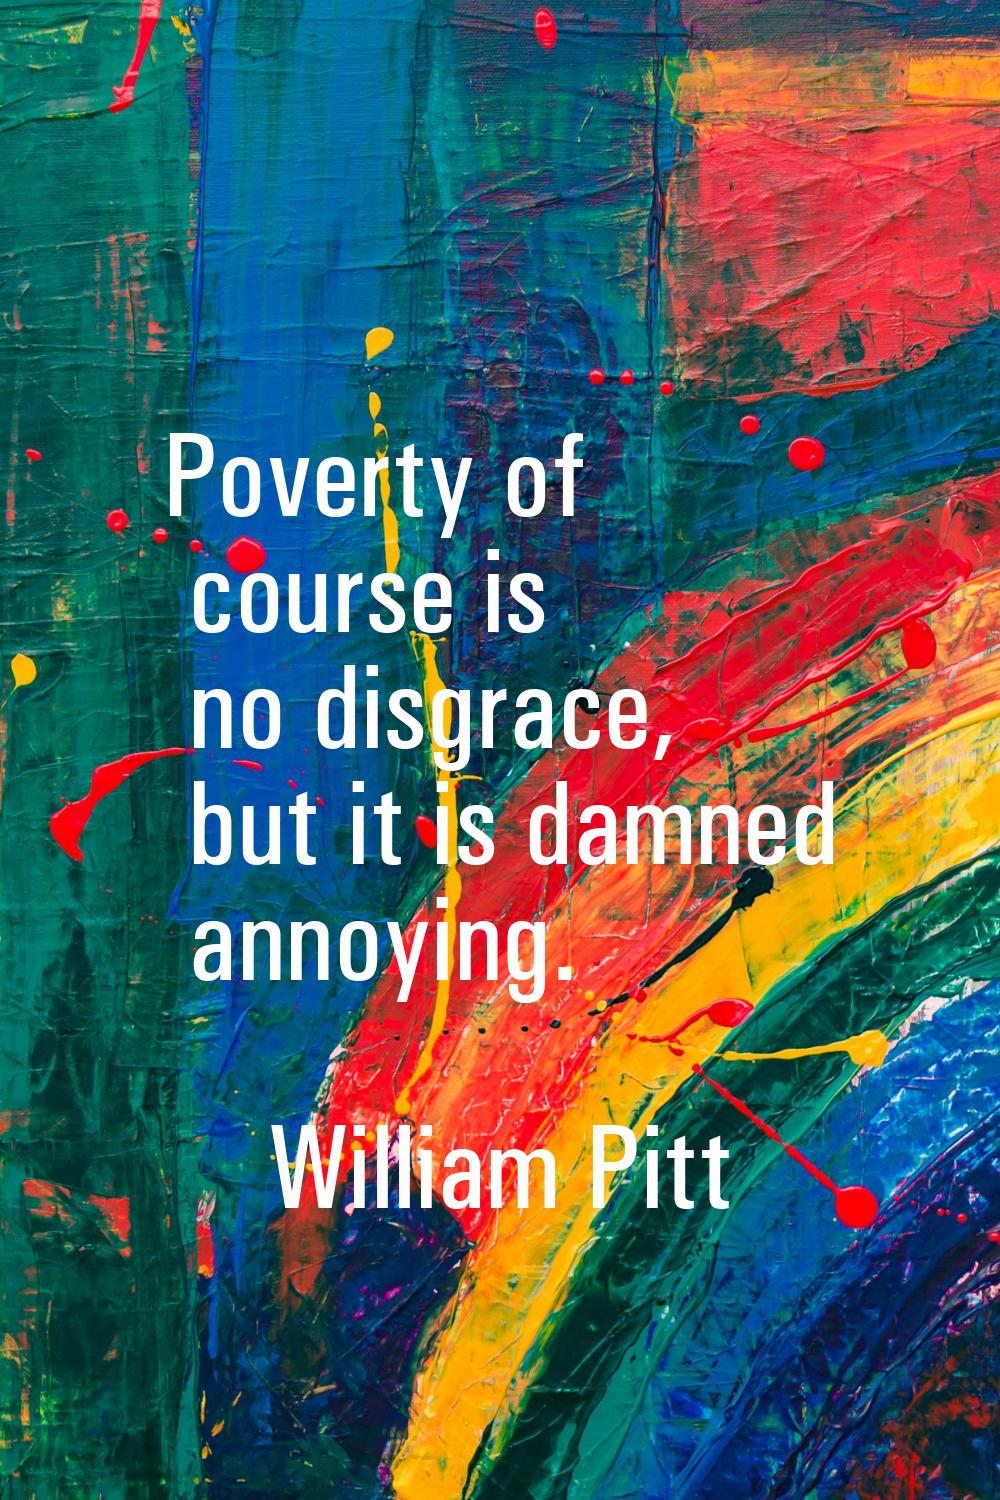 Poverty of course is no disgrace, but it is damned annoying.